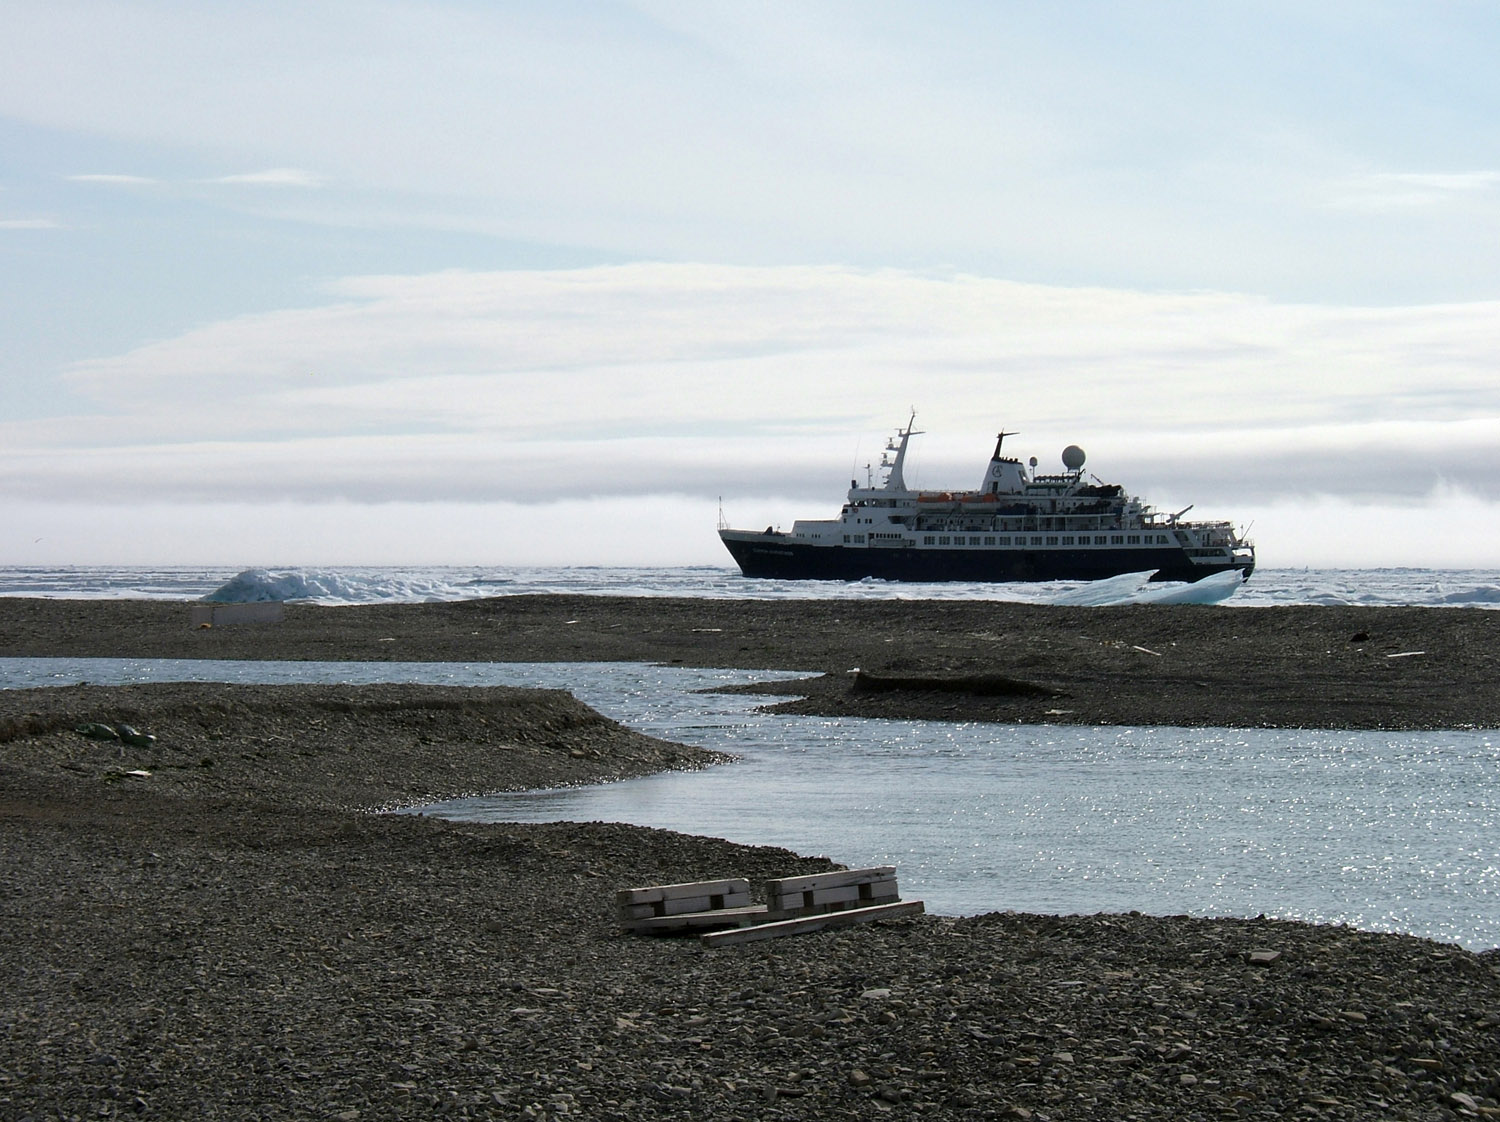 First View of the Ship - The Clipper Adventurer - in Resolute Bay